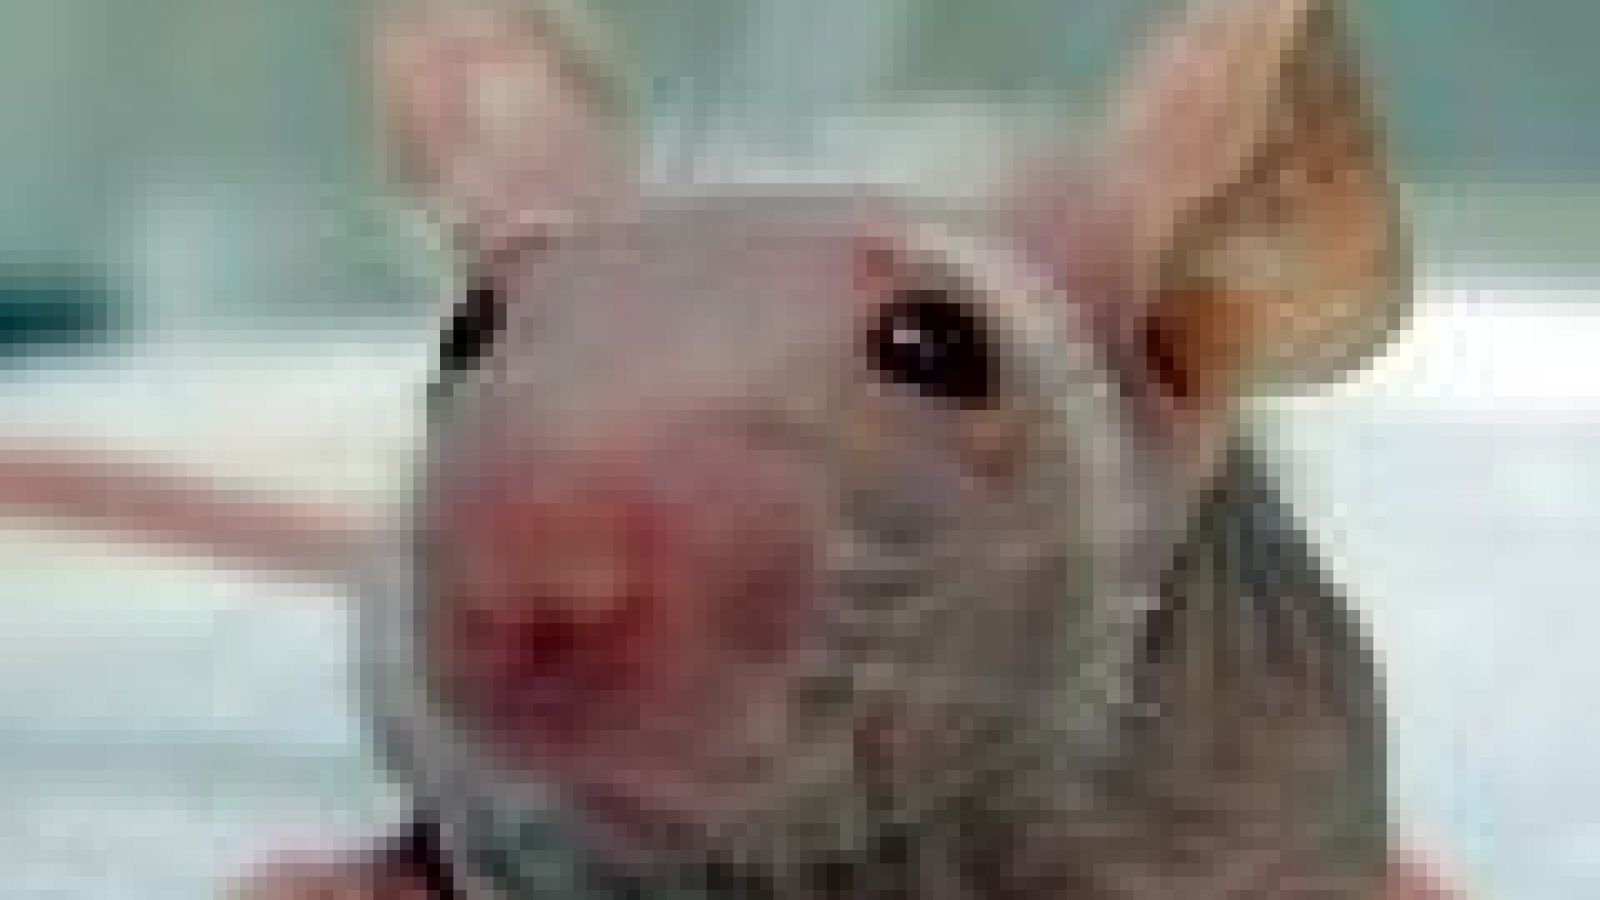 Mouse clues to testicular cancer